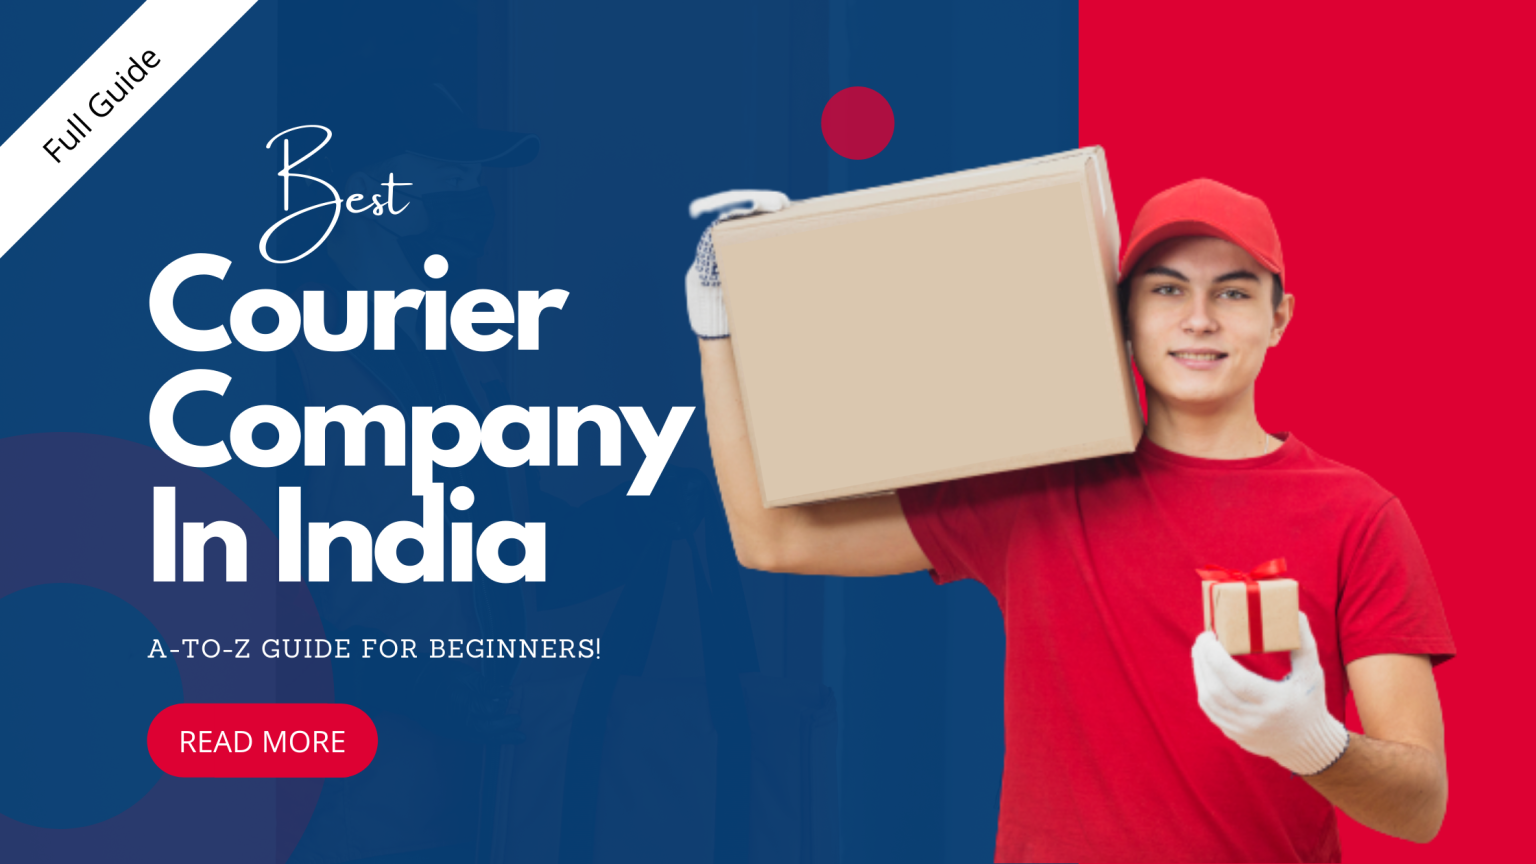 5+ Best Courier Company In India AtoZ Guide for Beginners!